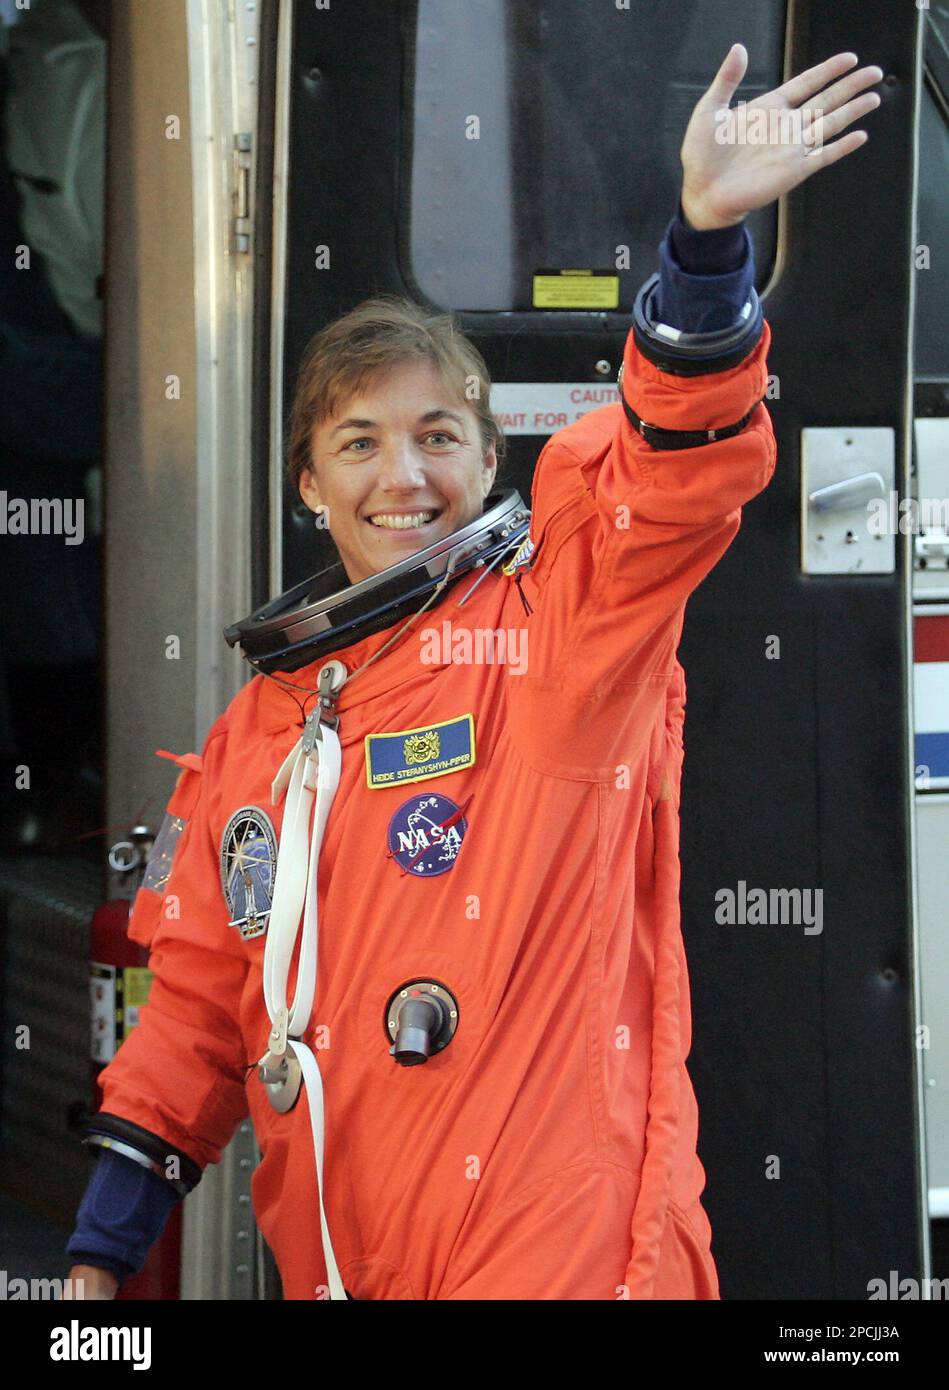 https://c8.alamy.com/comp/2PCJJ3A/sts-115-mission-specialist-heidemarie-stefanyshyn-piper-waves-as-she-exits-the-operations-and-checkout-building-at-the-kennedy-space-center-in-cape-canaveral-fla-saturday-sept-9-2006-nasa-officials-are-hoping-for-a-successful-launch-of-the-space-shuttle-atlantis-after-several-delays-because-of-mechanical-problems-ap-phototerry-renna-2PCJJ3A.jpg